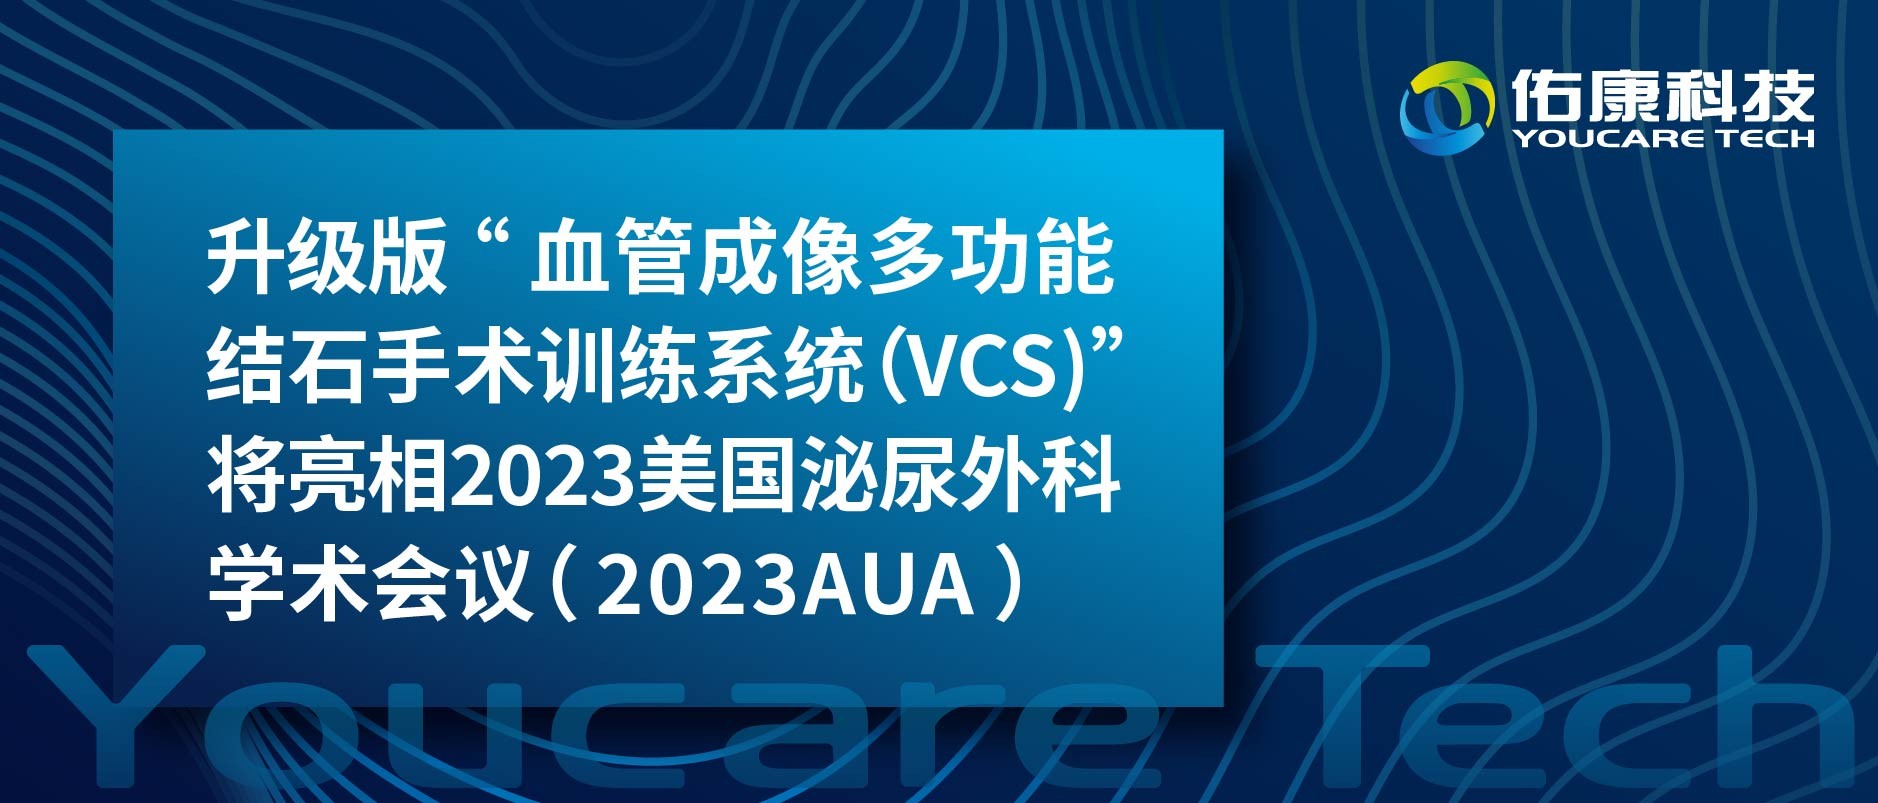 Upgraded version of 'Vascular Imaging Multifunctional Stone Surgery Training System' will be unveile